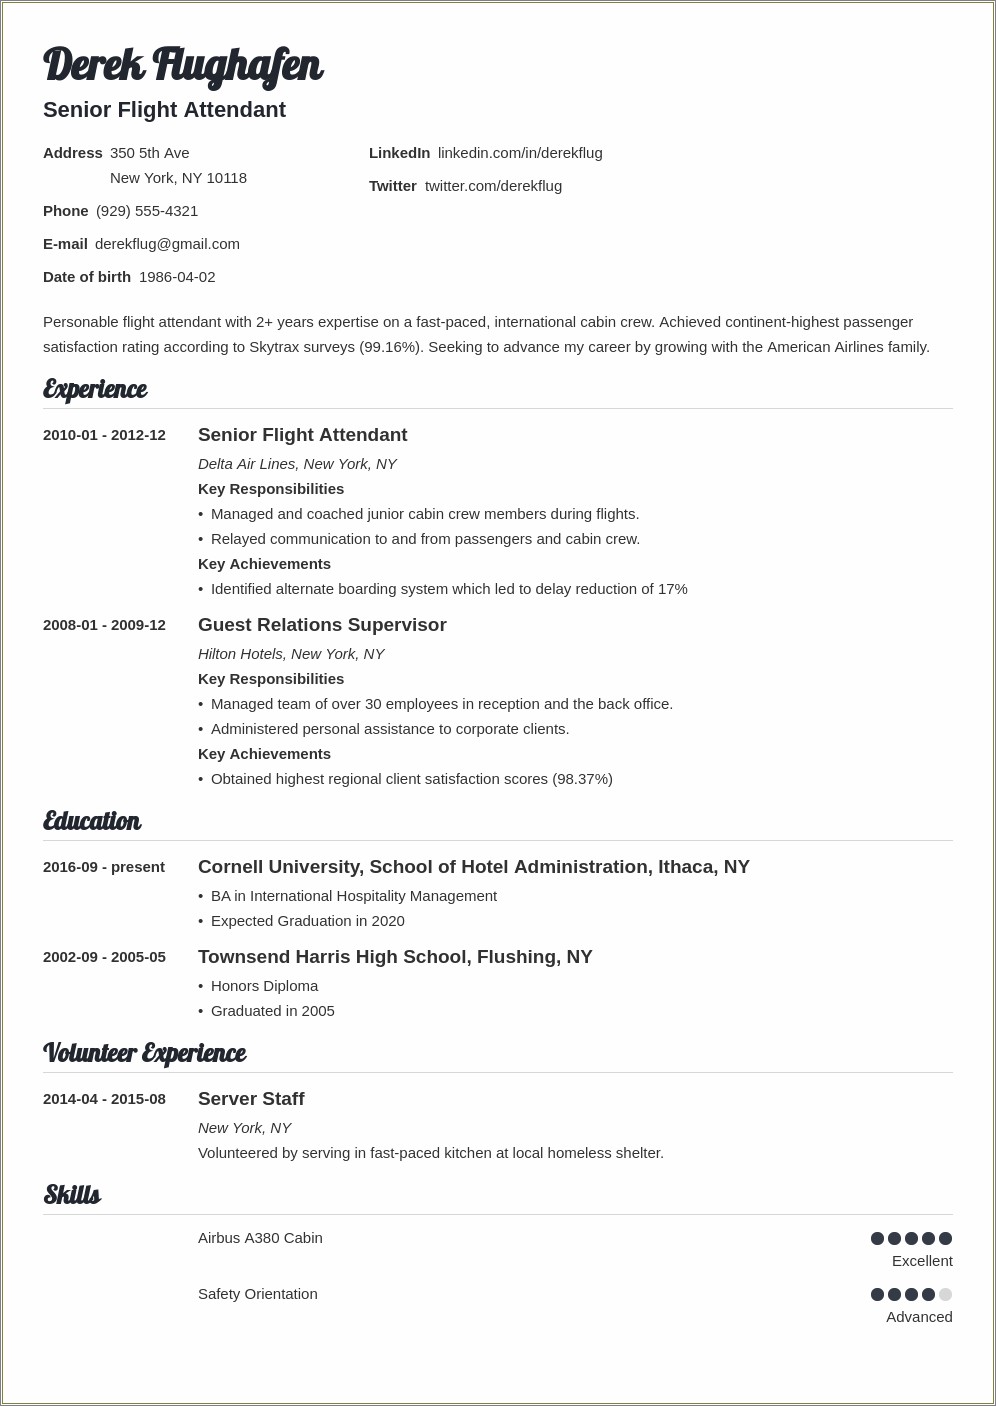 Resume Objective For Flight Attendant With No Experience